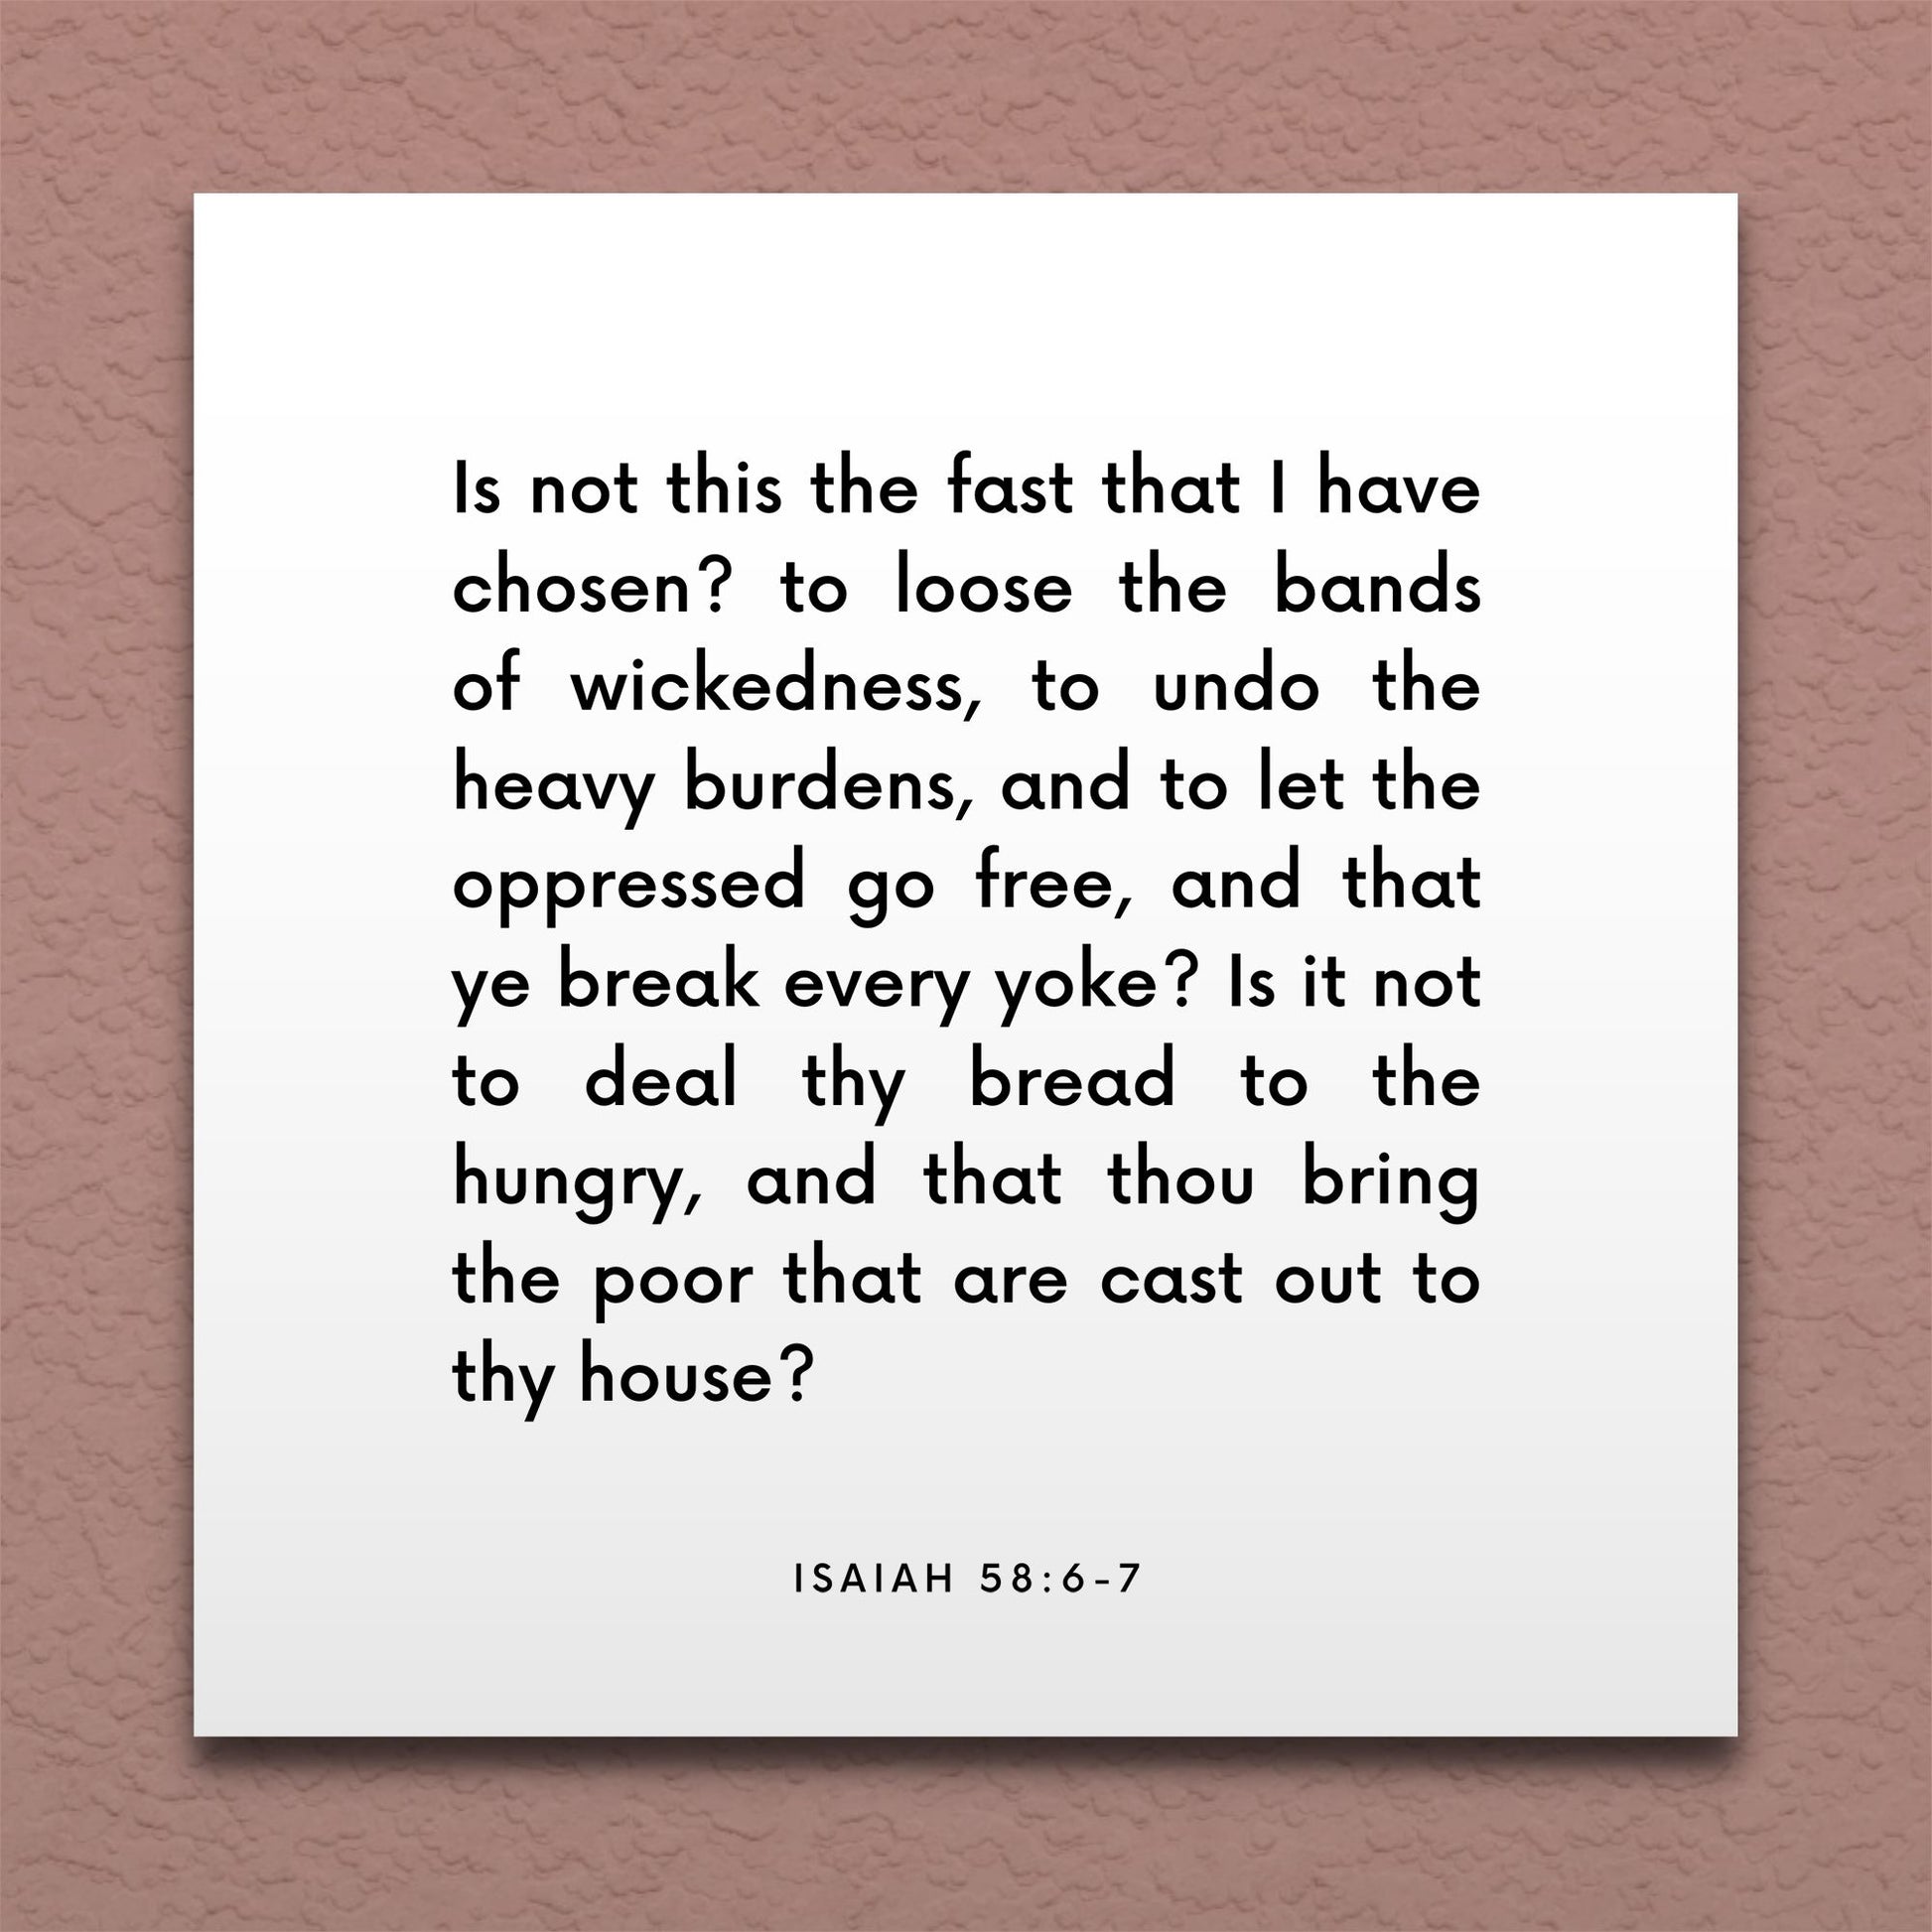 Wall-mounted scripture tile for Isaiah 58:6-7 - "Is not this the fast that I have chosen?"